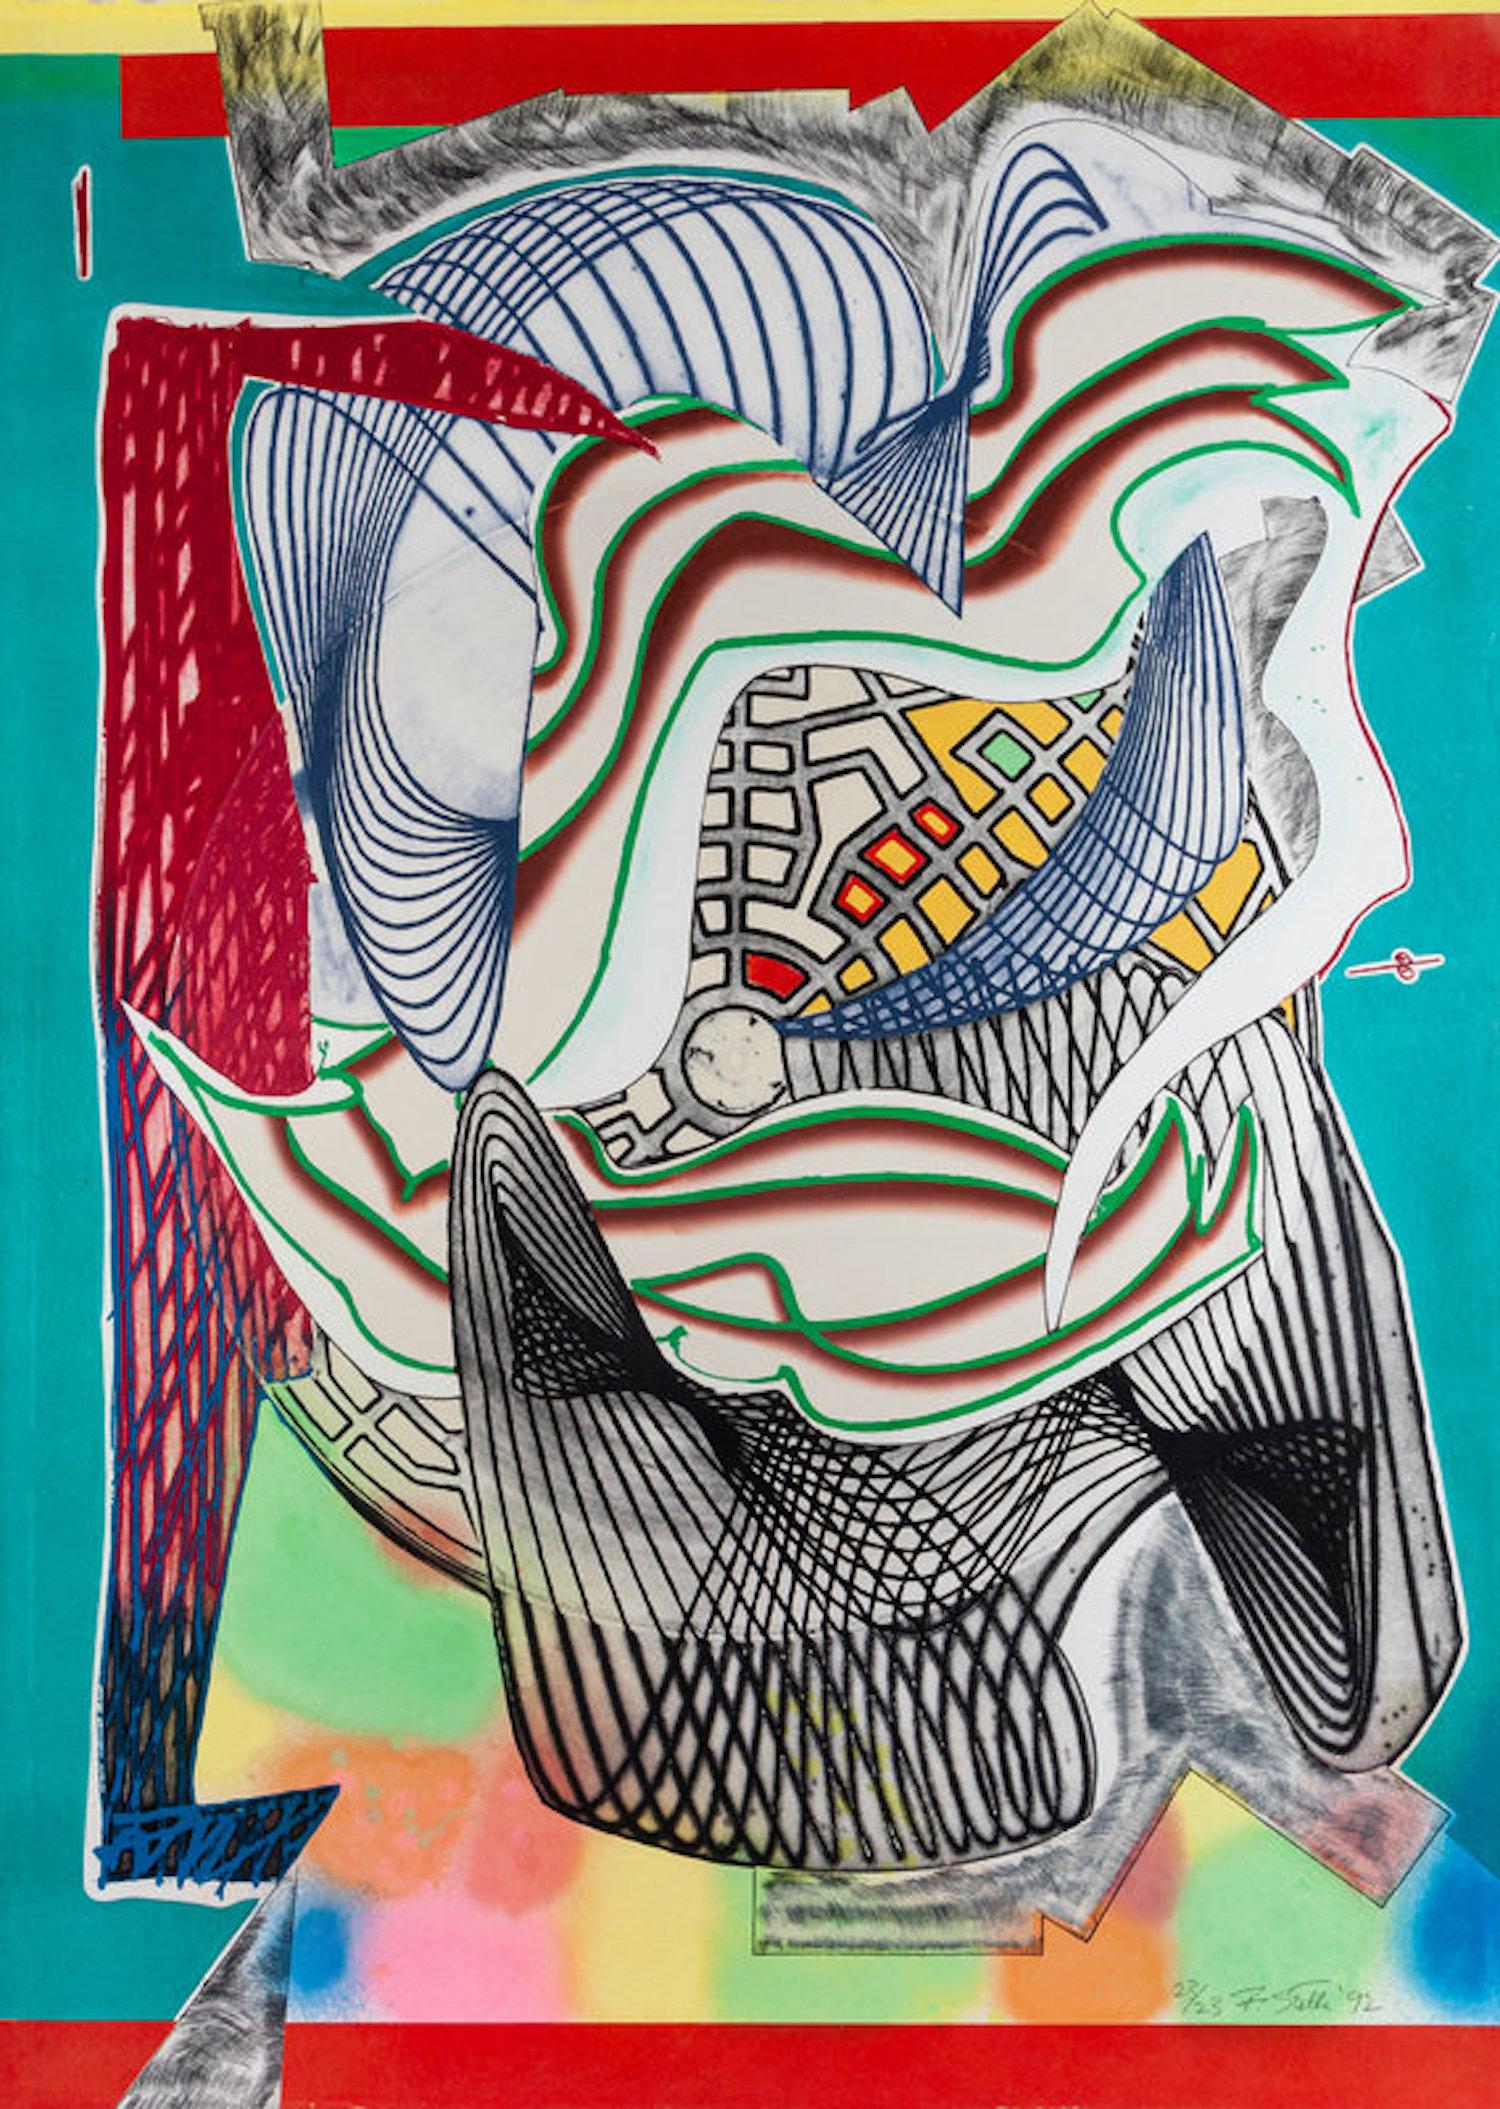 Frank Stella 'The Funeral' (Dome) 1992